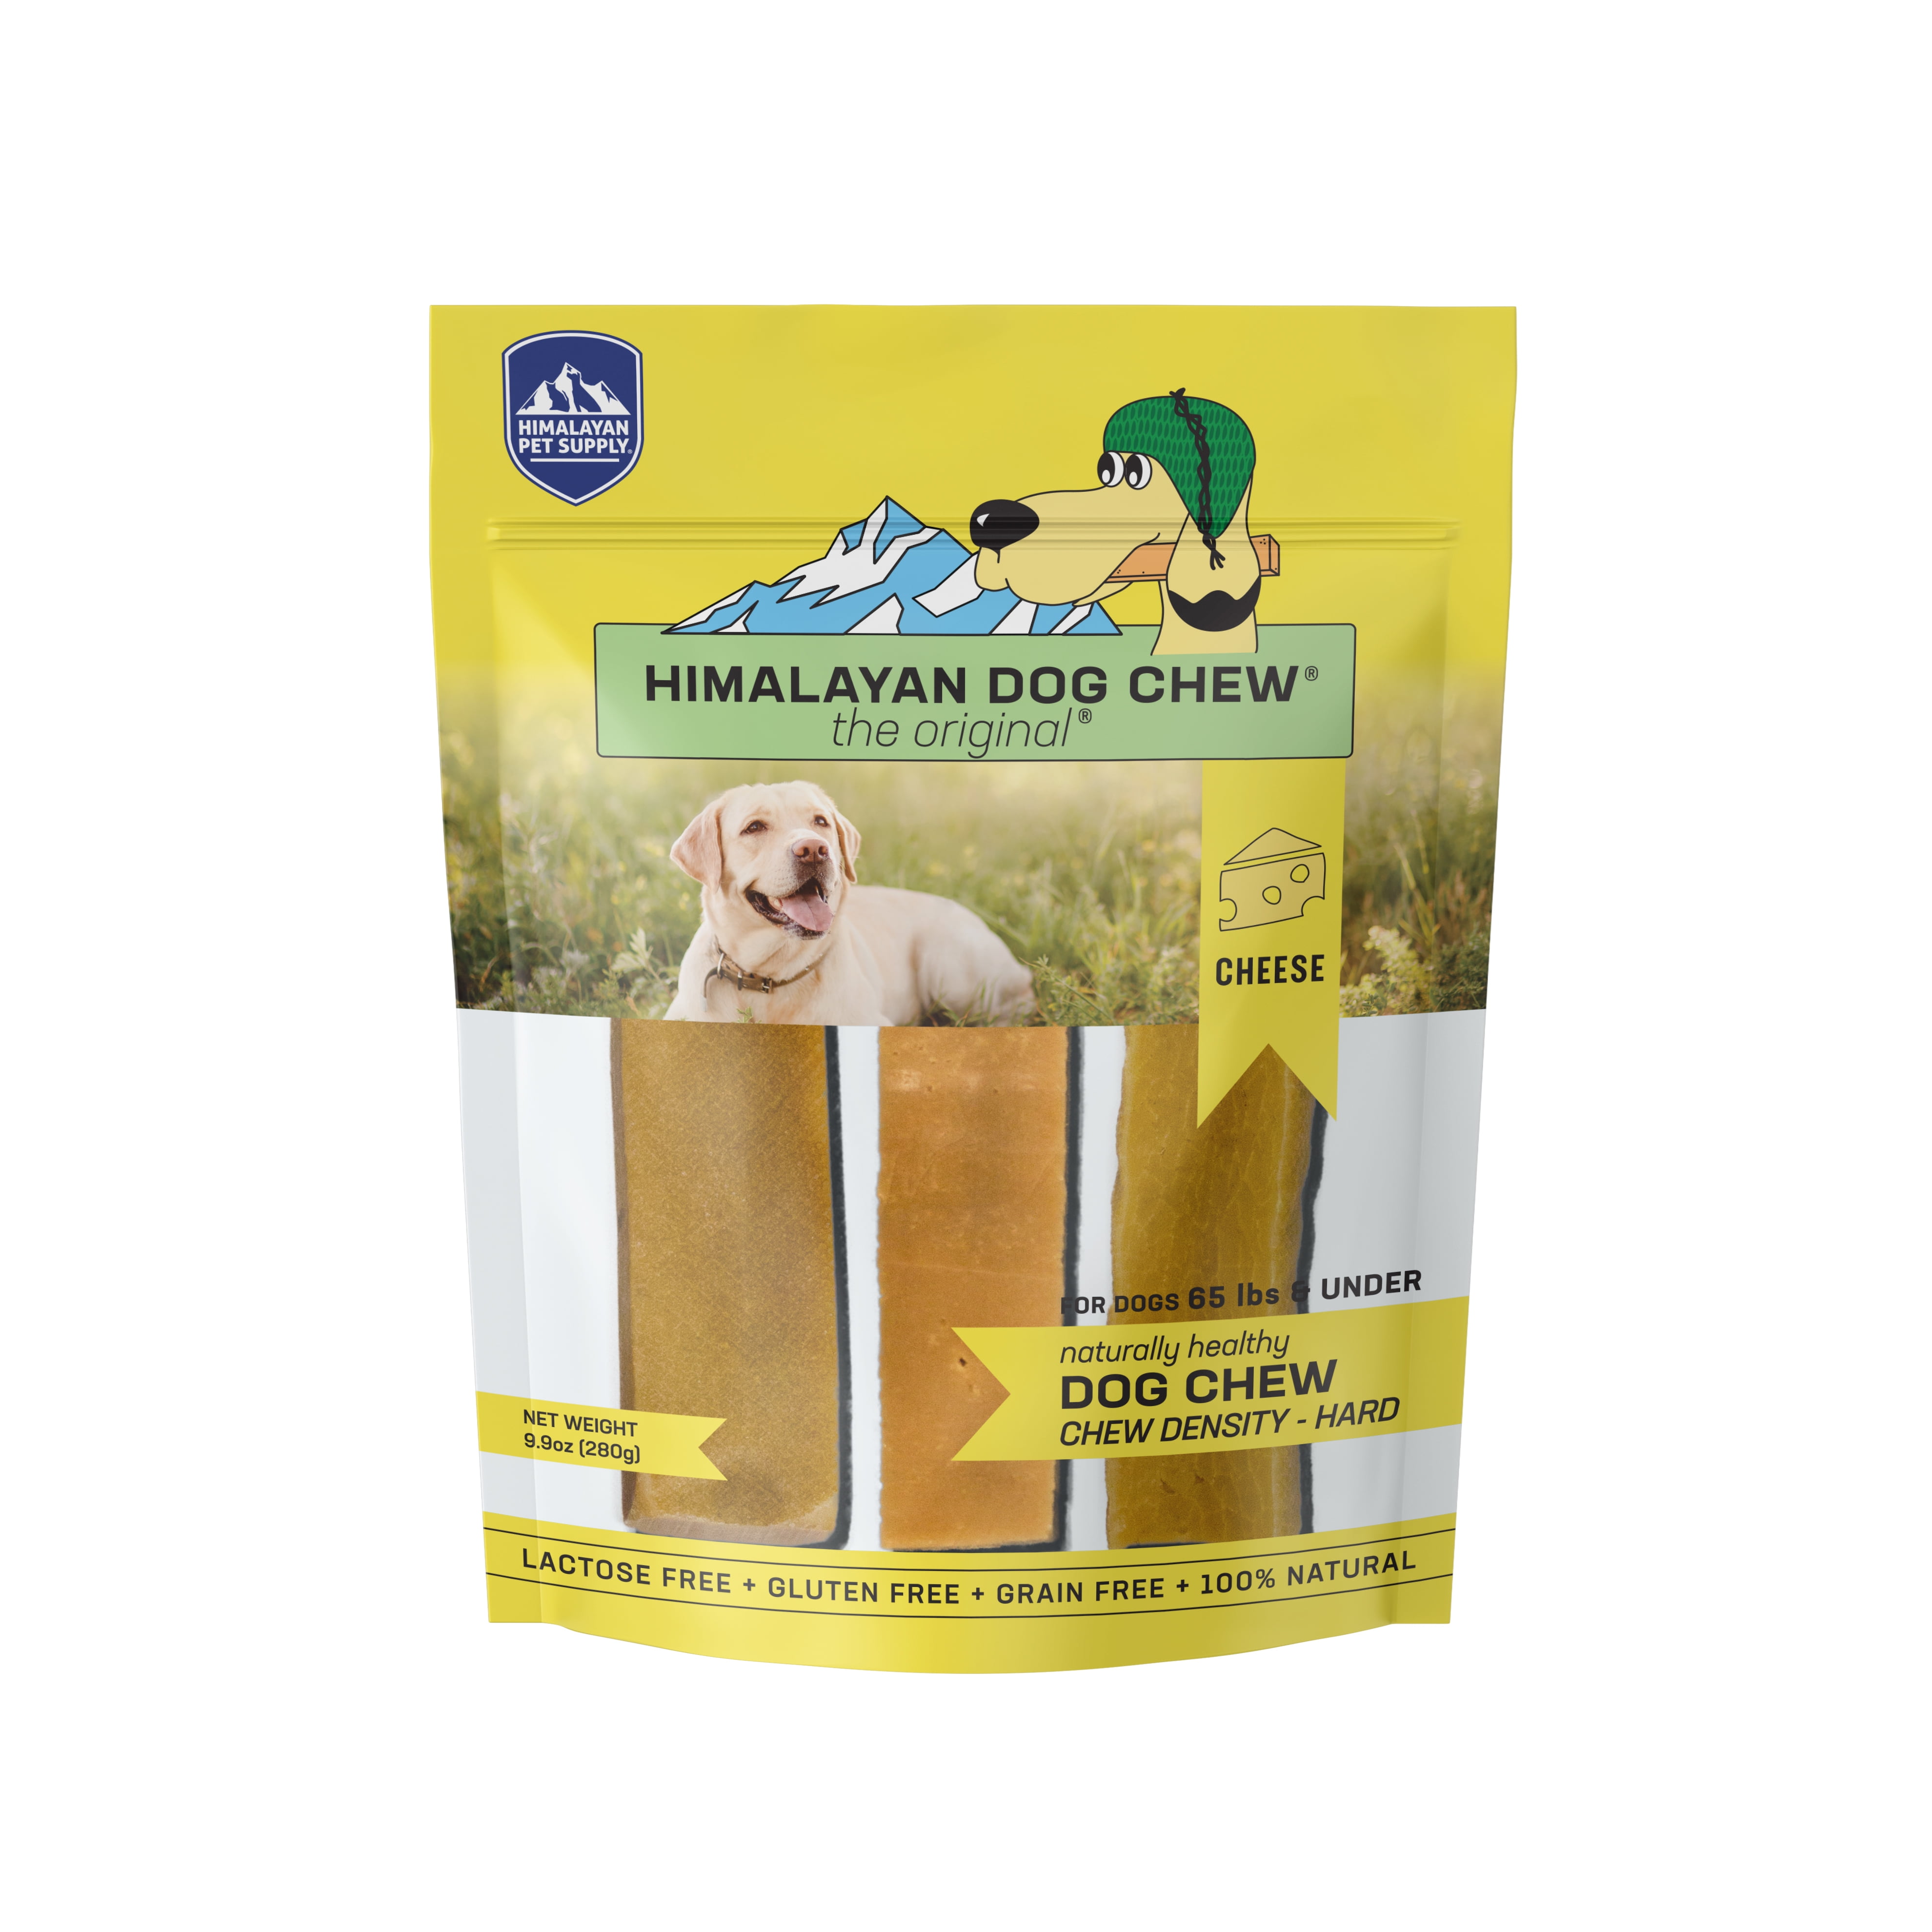 Gluten No Lactose Protein Rich Stain Free Himalayan Pet supply Dog Chew Bone Small Long Lasting Healthy & Safe for Dogs 30 lbs and Under Low Odor 100% Natural Soy or Grains